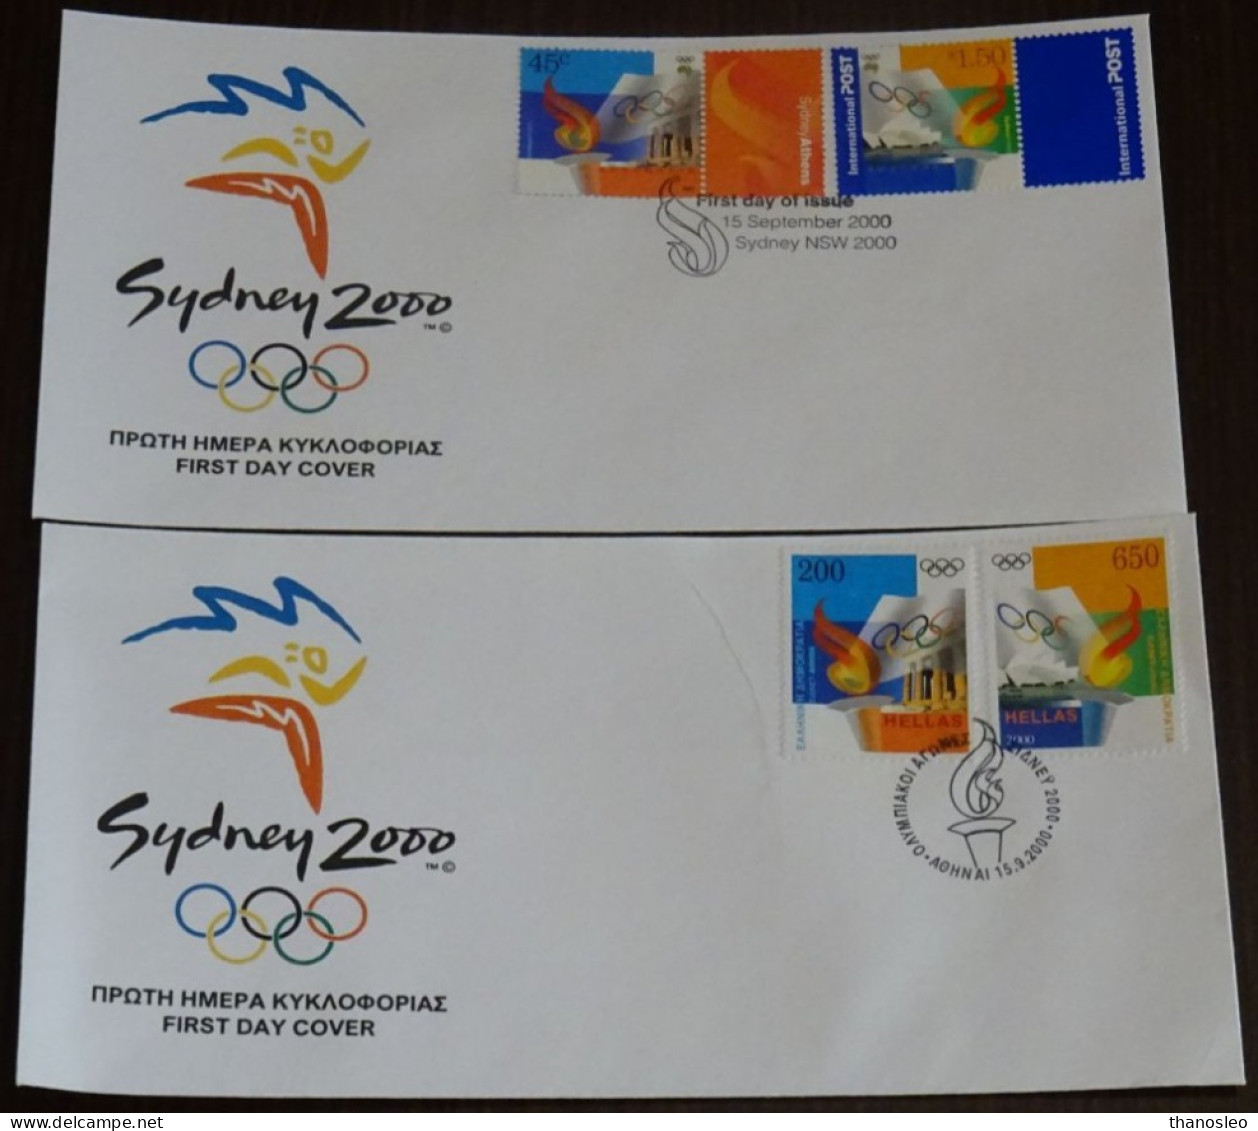 Australia-Greece 2000 Joint Issue For Olympic Games FDC VF - Sobre Primer Día (FDC)